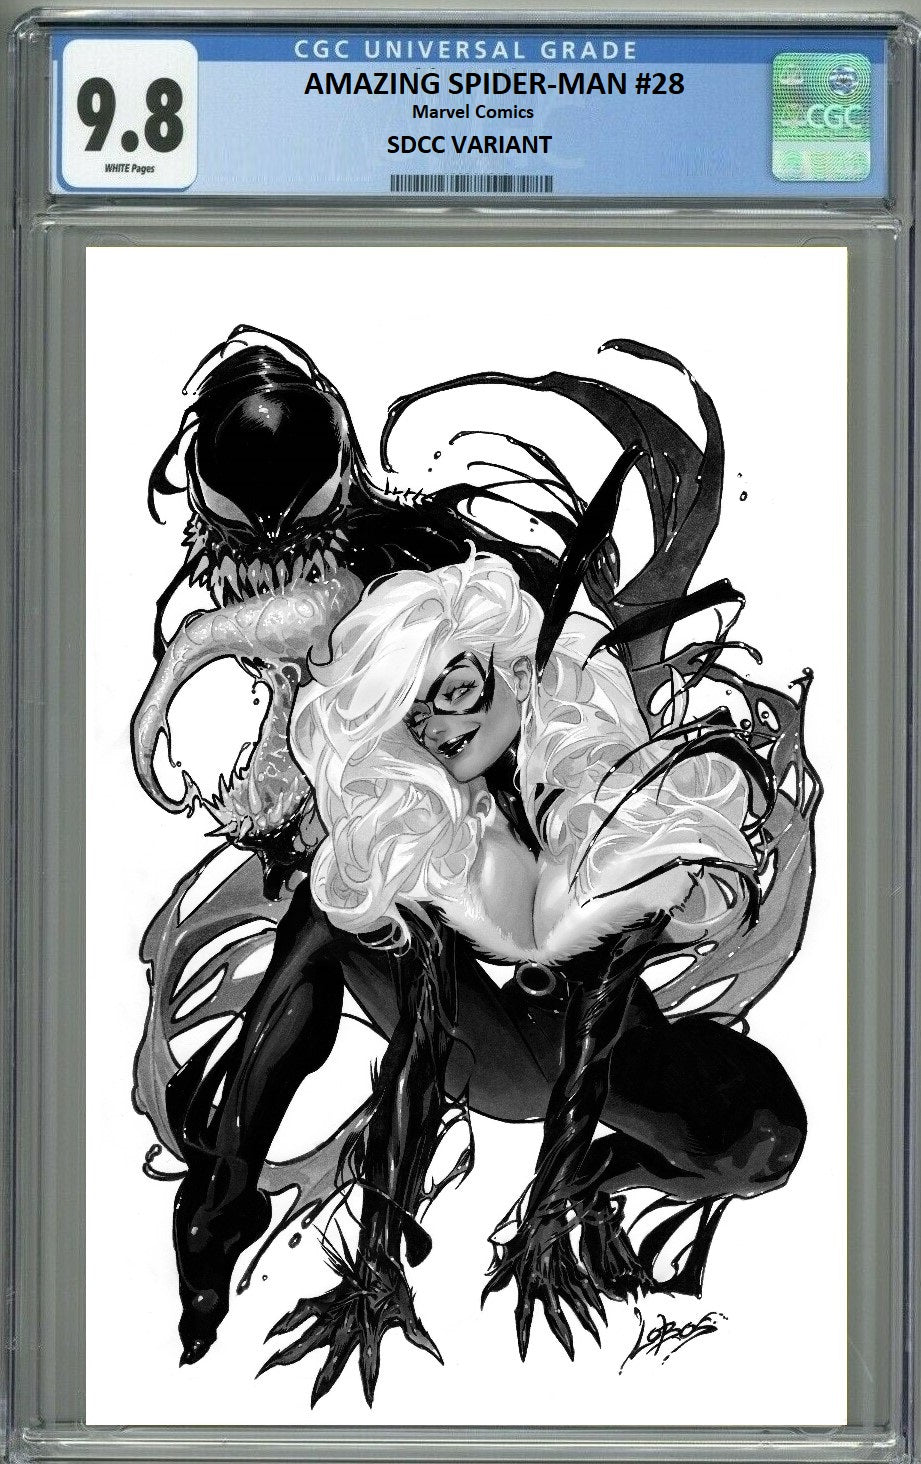 SDCC 2023 AMAZING SPIDER-MAN #27 PABLO VILLALOBOS SKETCH VARIANT LIMITED TO 1000 COPIES - RAW & GRADED OPTIONS